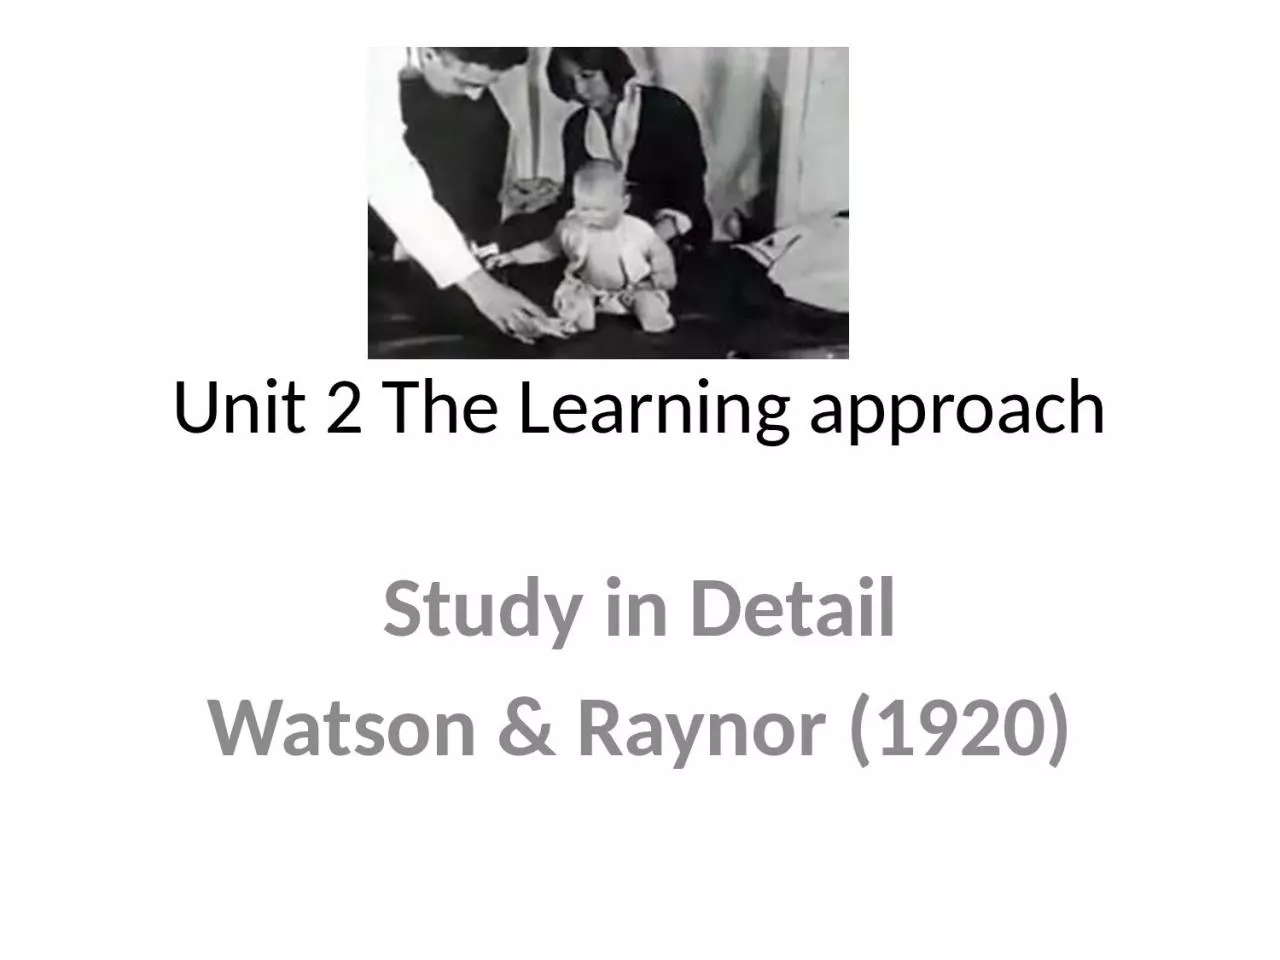 Unit 2 The Learning approach